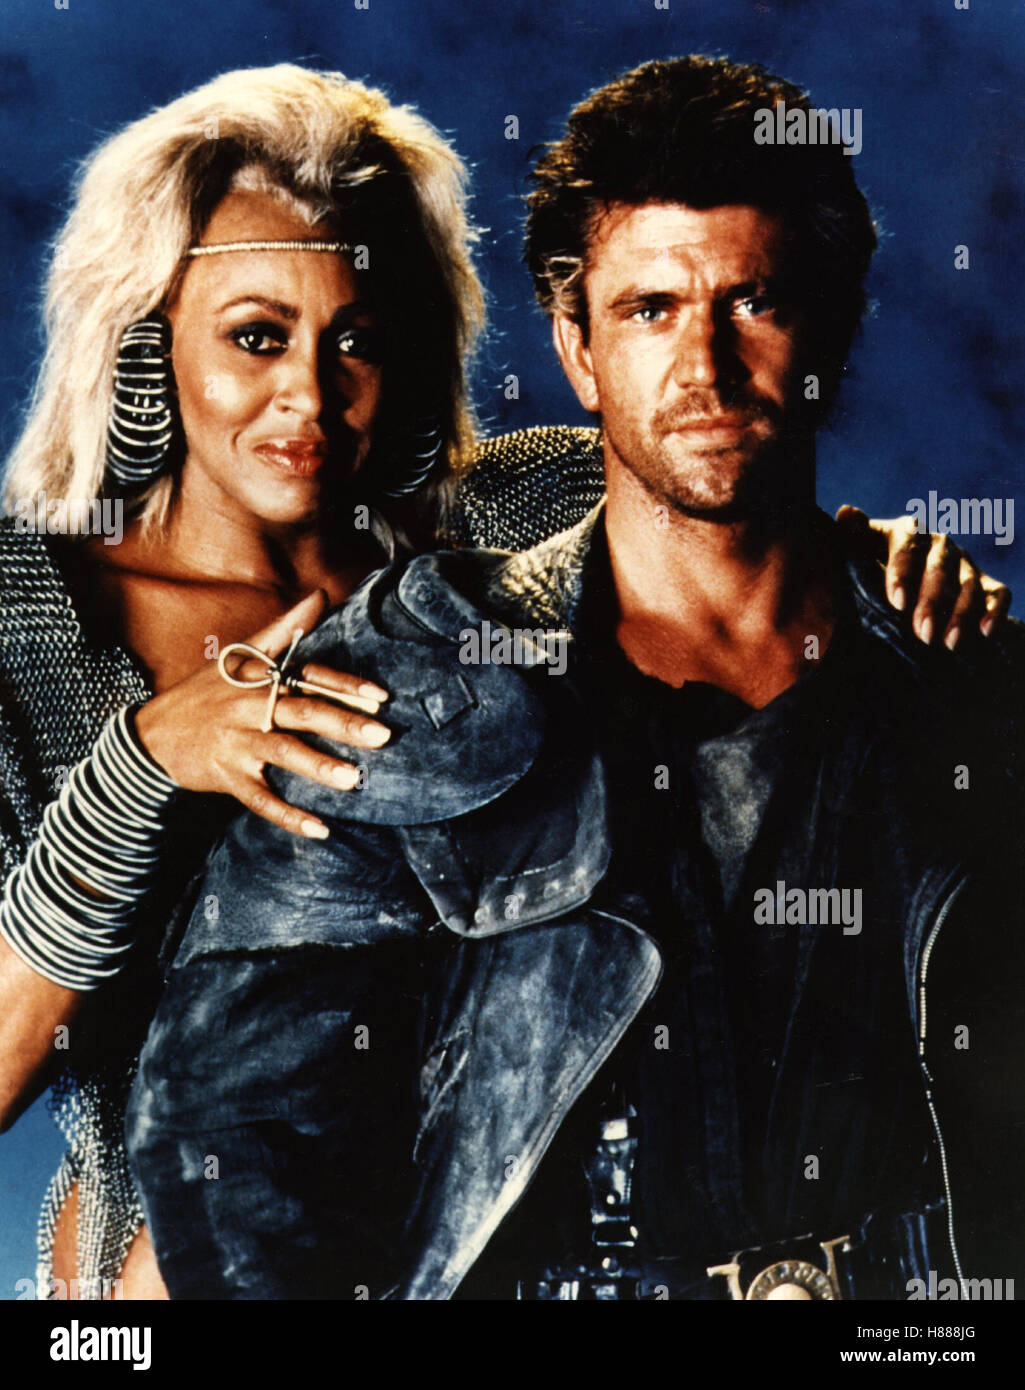 Mad Max - Jenseits der Donnerkuppel, (MAD MAX OLTRE IL THUNDERDOME) AUS  1985, George Miller, TINA TURNER + mel gibson Foto stock - Alamy